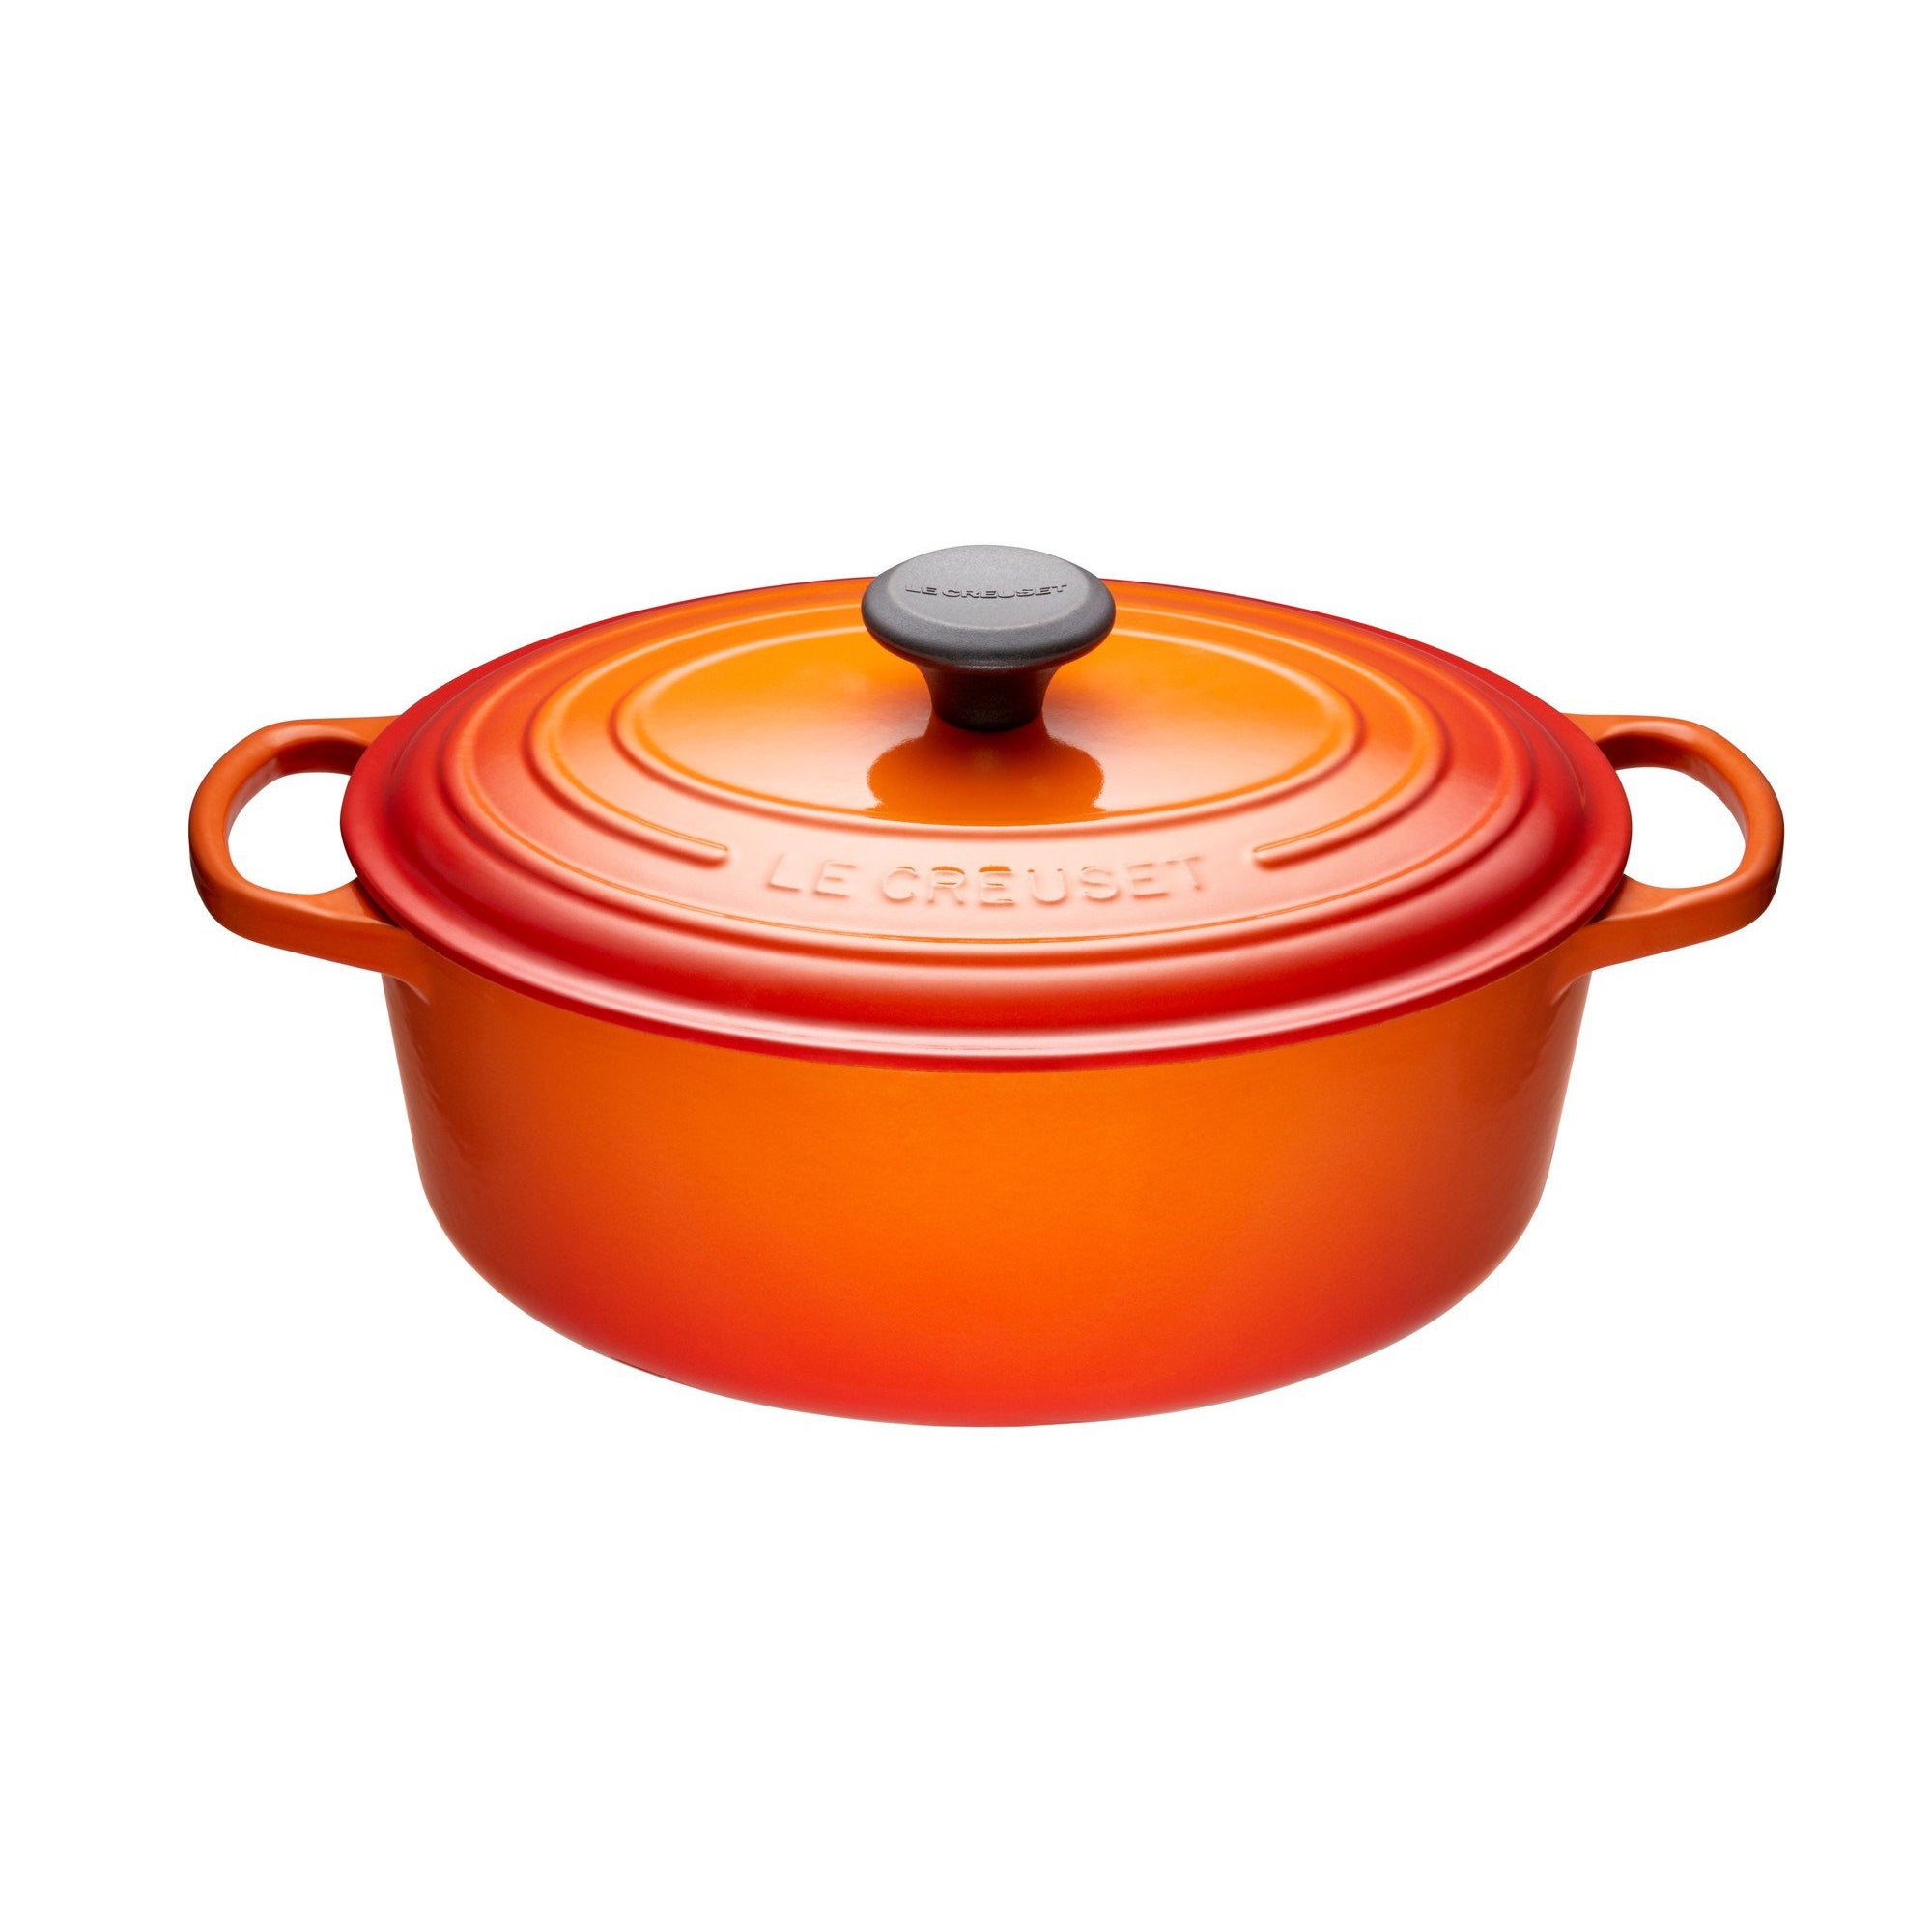 bekymring disharmoni Fancy kjole Le Creuset 4.7L Flame Oval French/Dutch Oven (29 cm) — Consiglio's  Kitchenware